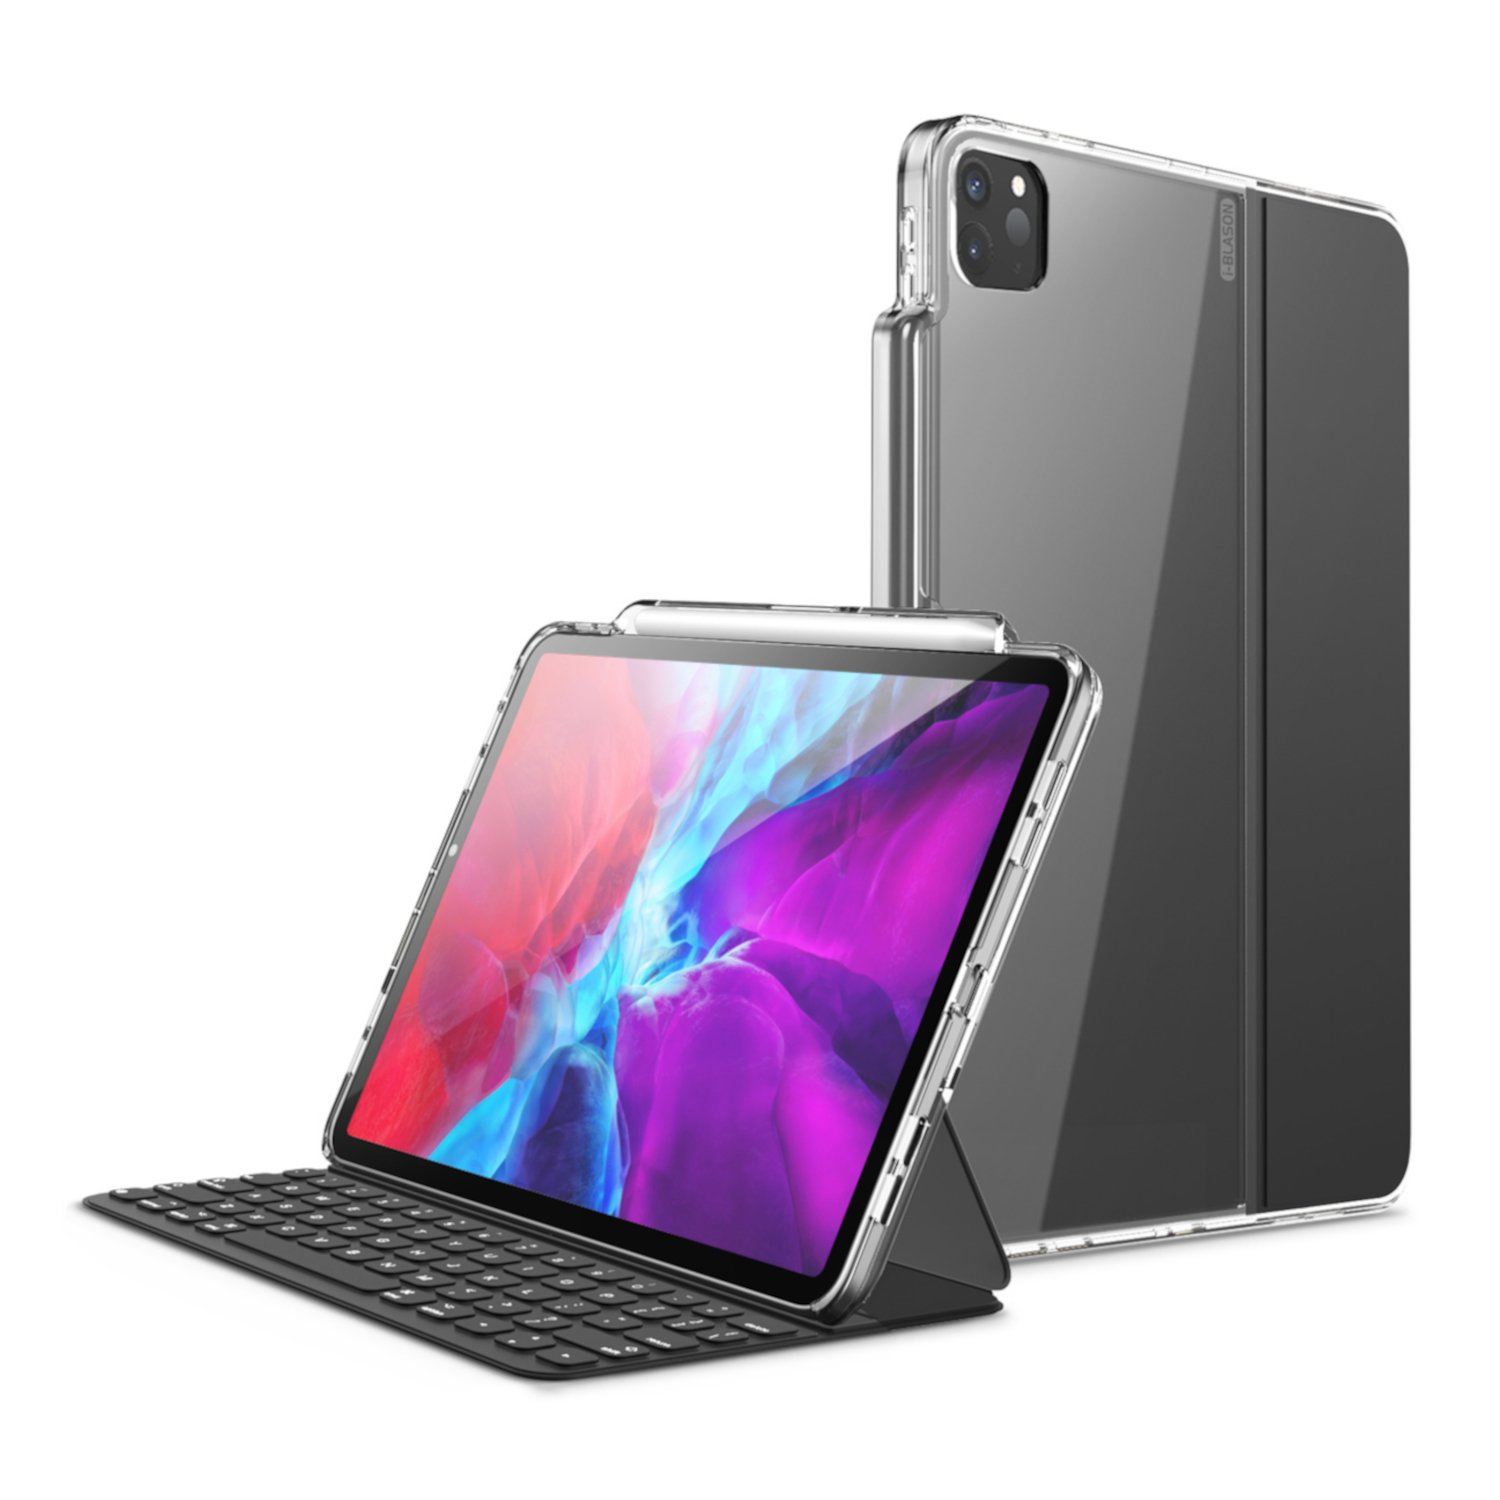 i-Blason Halo Series Clear Hybrid Keyboard Compatible Protective Case With Pencil Holder for iPad Pro 12.9"(2020), Clear iPad Pro 12.9"(2020) I-Blason 